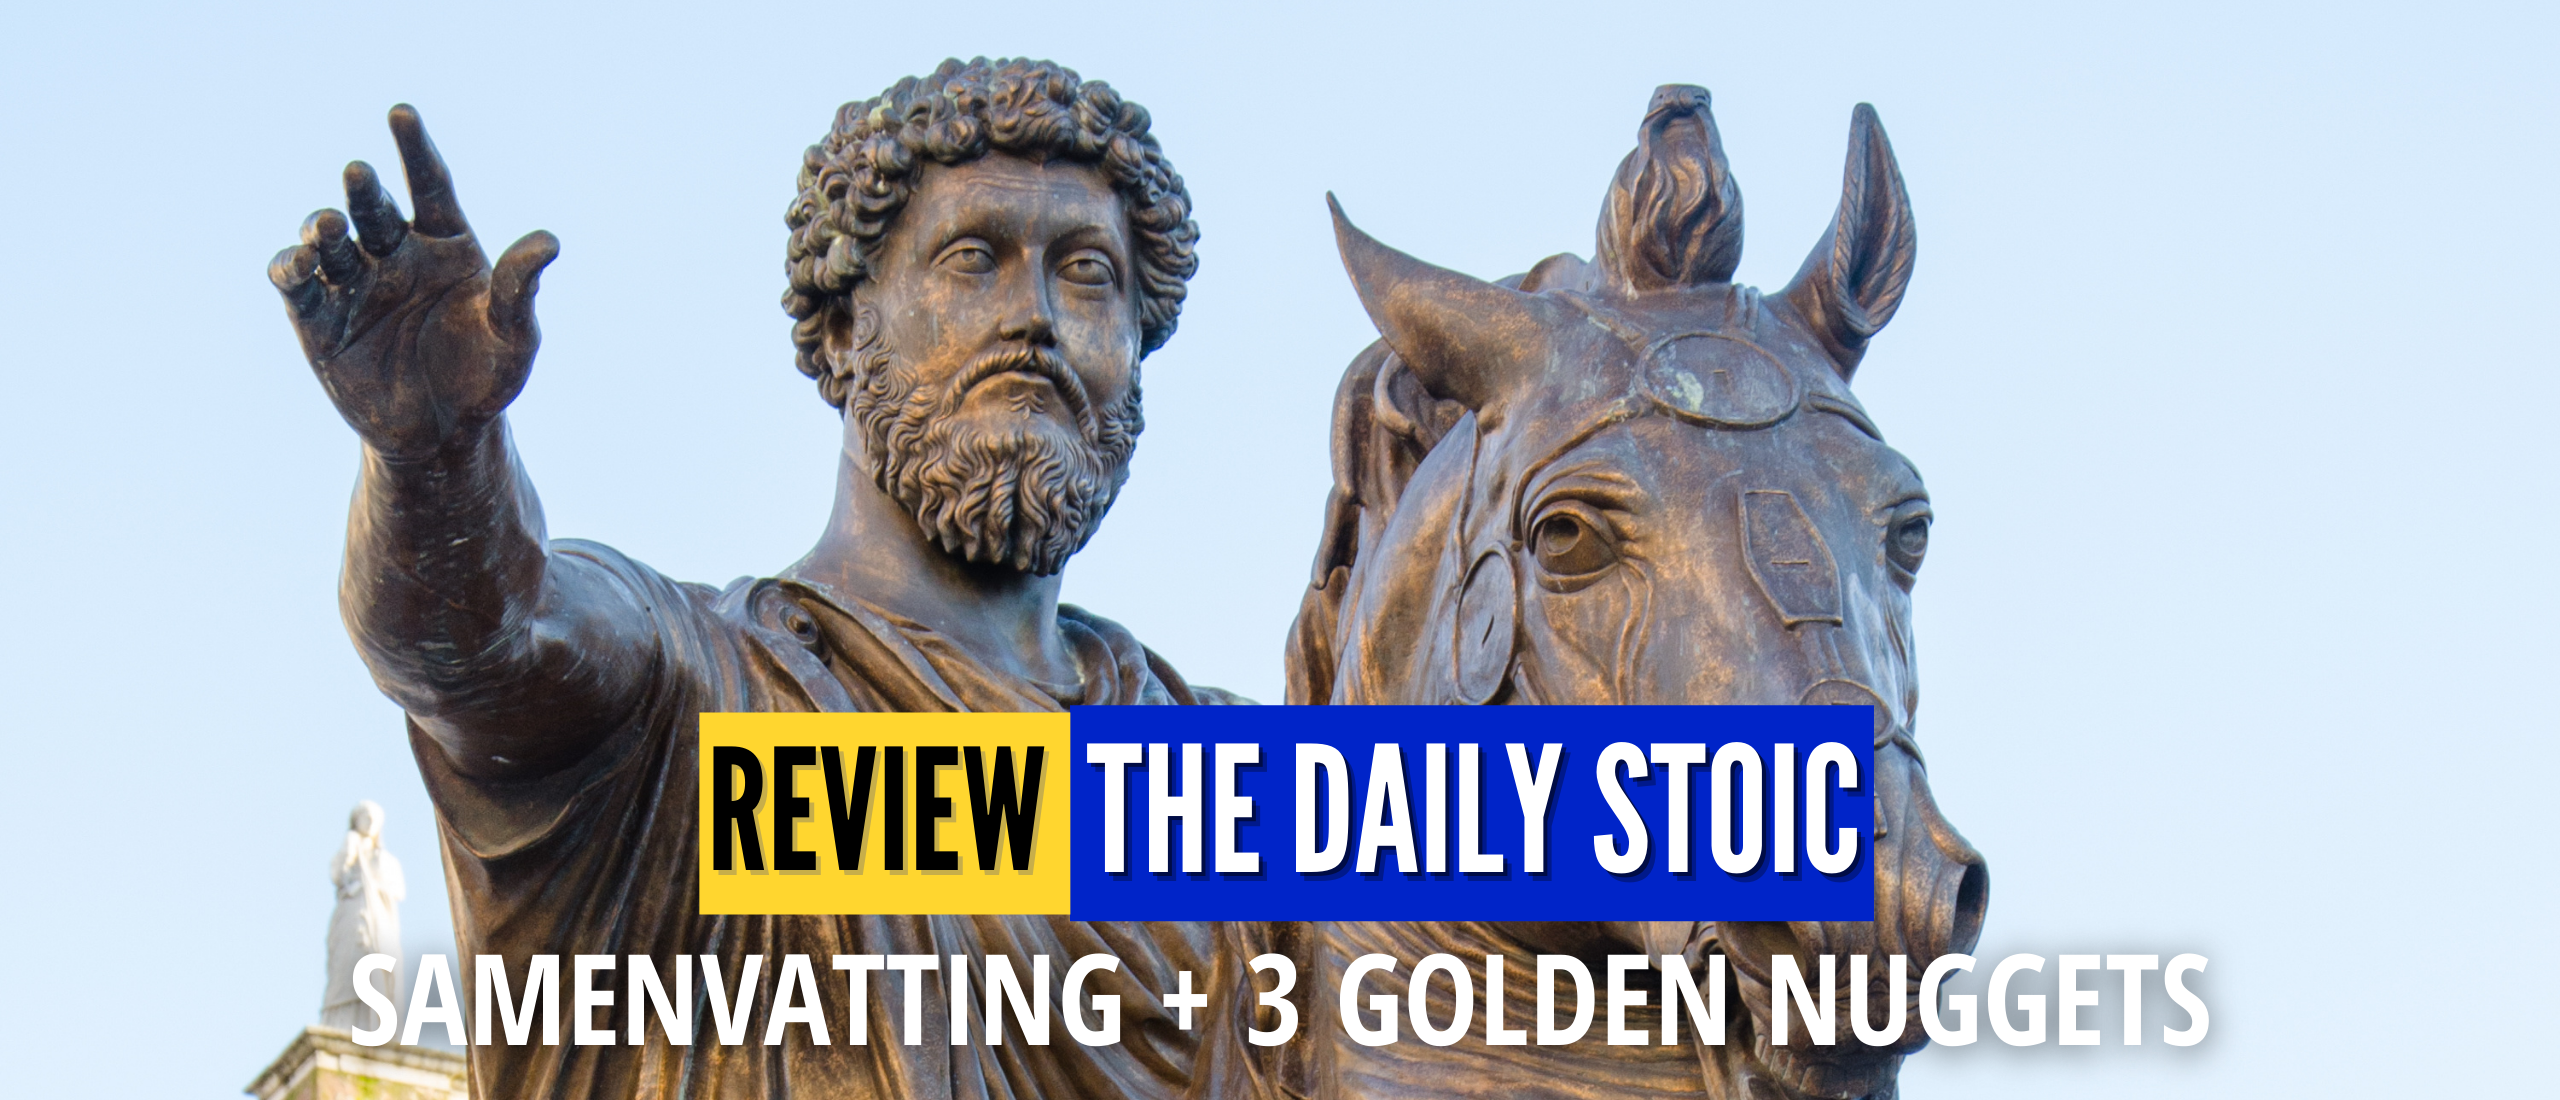 The Daily Stoic Review (Ryan Holiday) + 3 Golden Nuggets